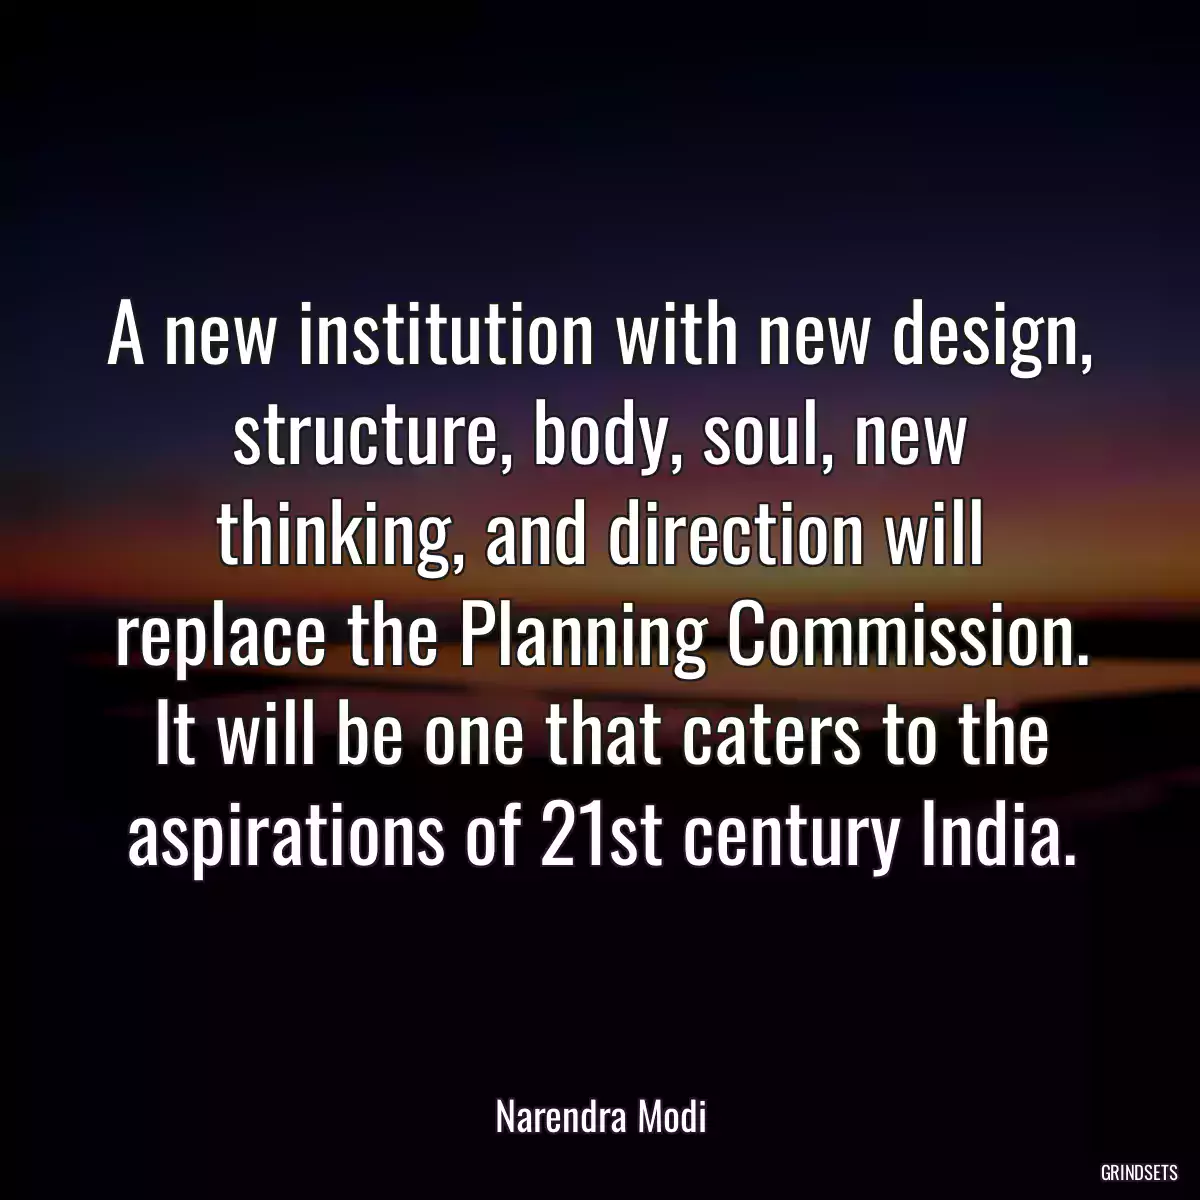 A new institution with new design, structure, body, soul, new thinking, and direction will replace the Planning Commission. It will be one that caters to the aspirations of 21st century India.